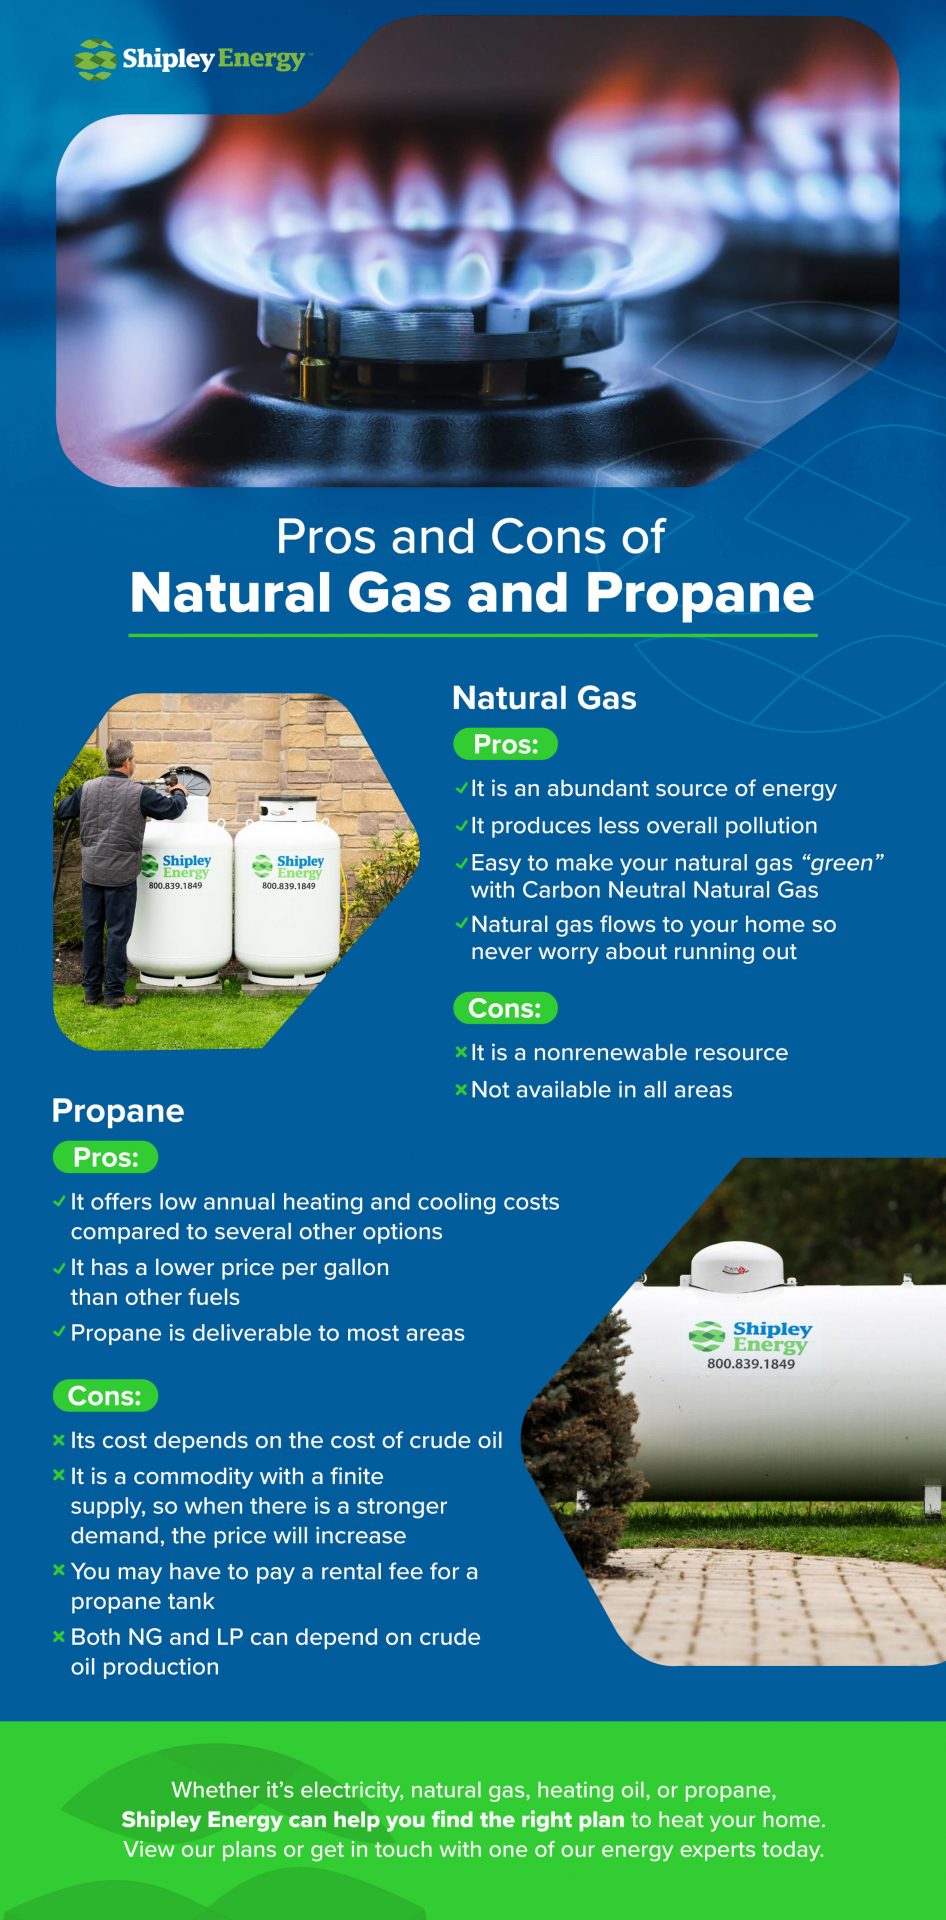 Pros and Cons of Natural Gas and Propane